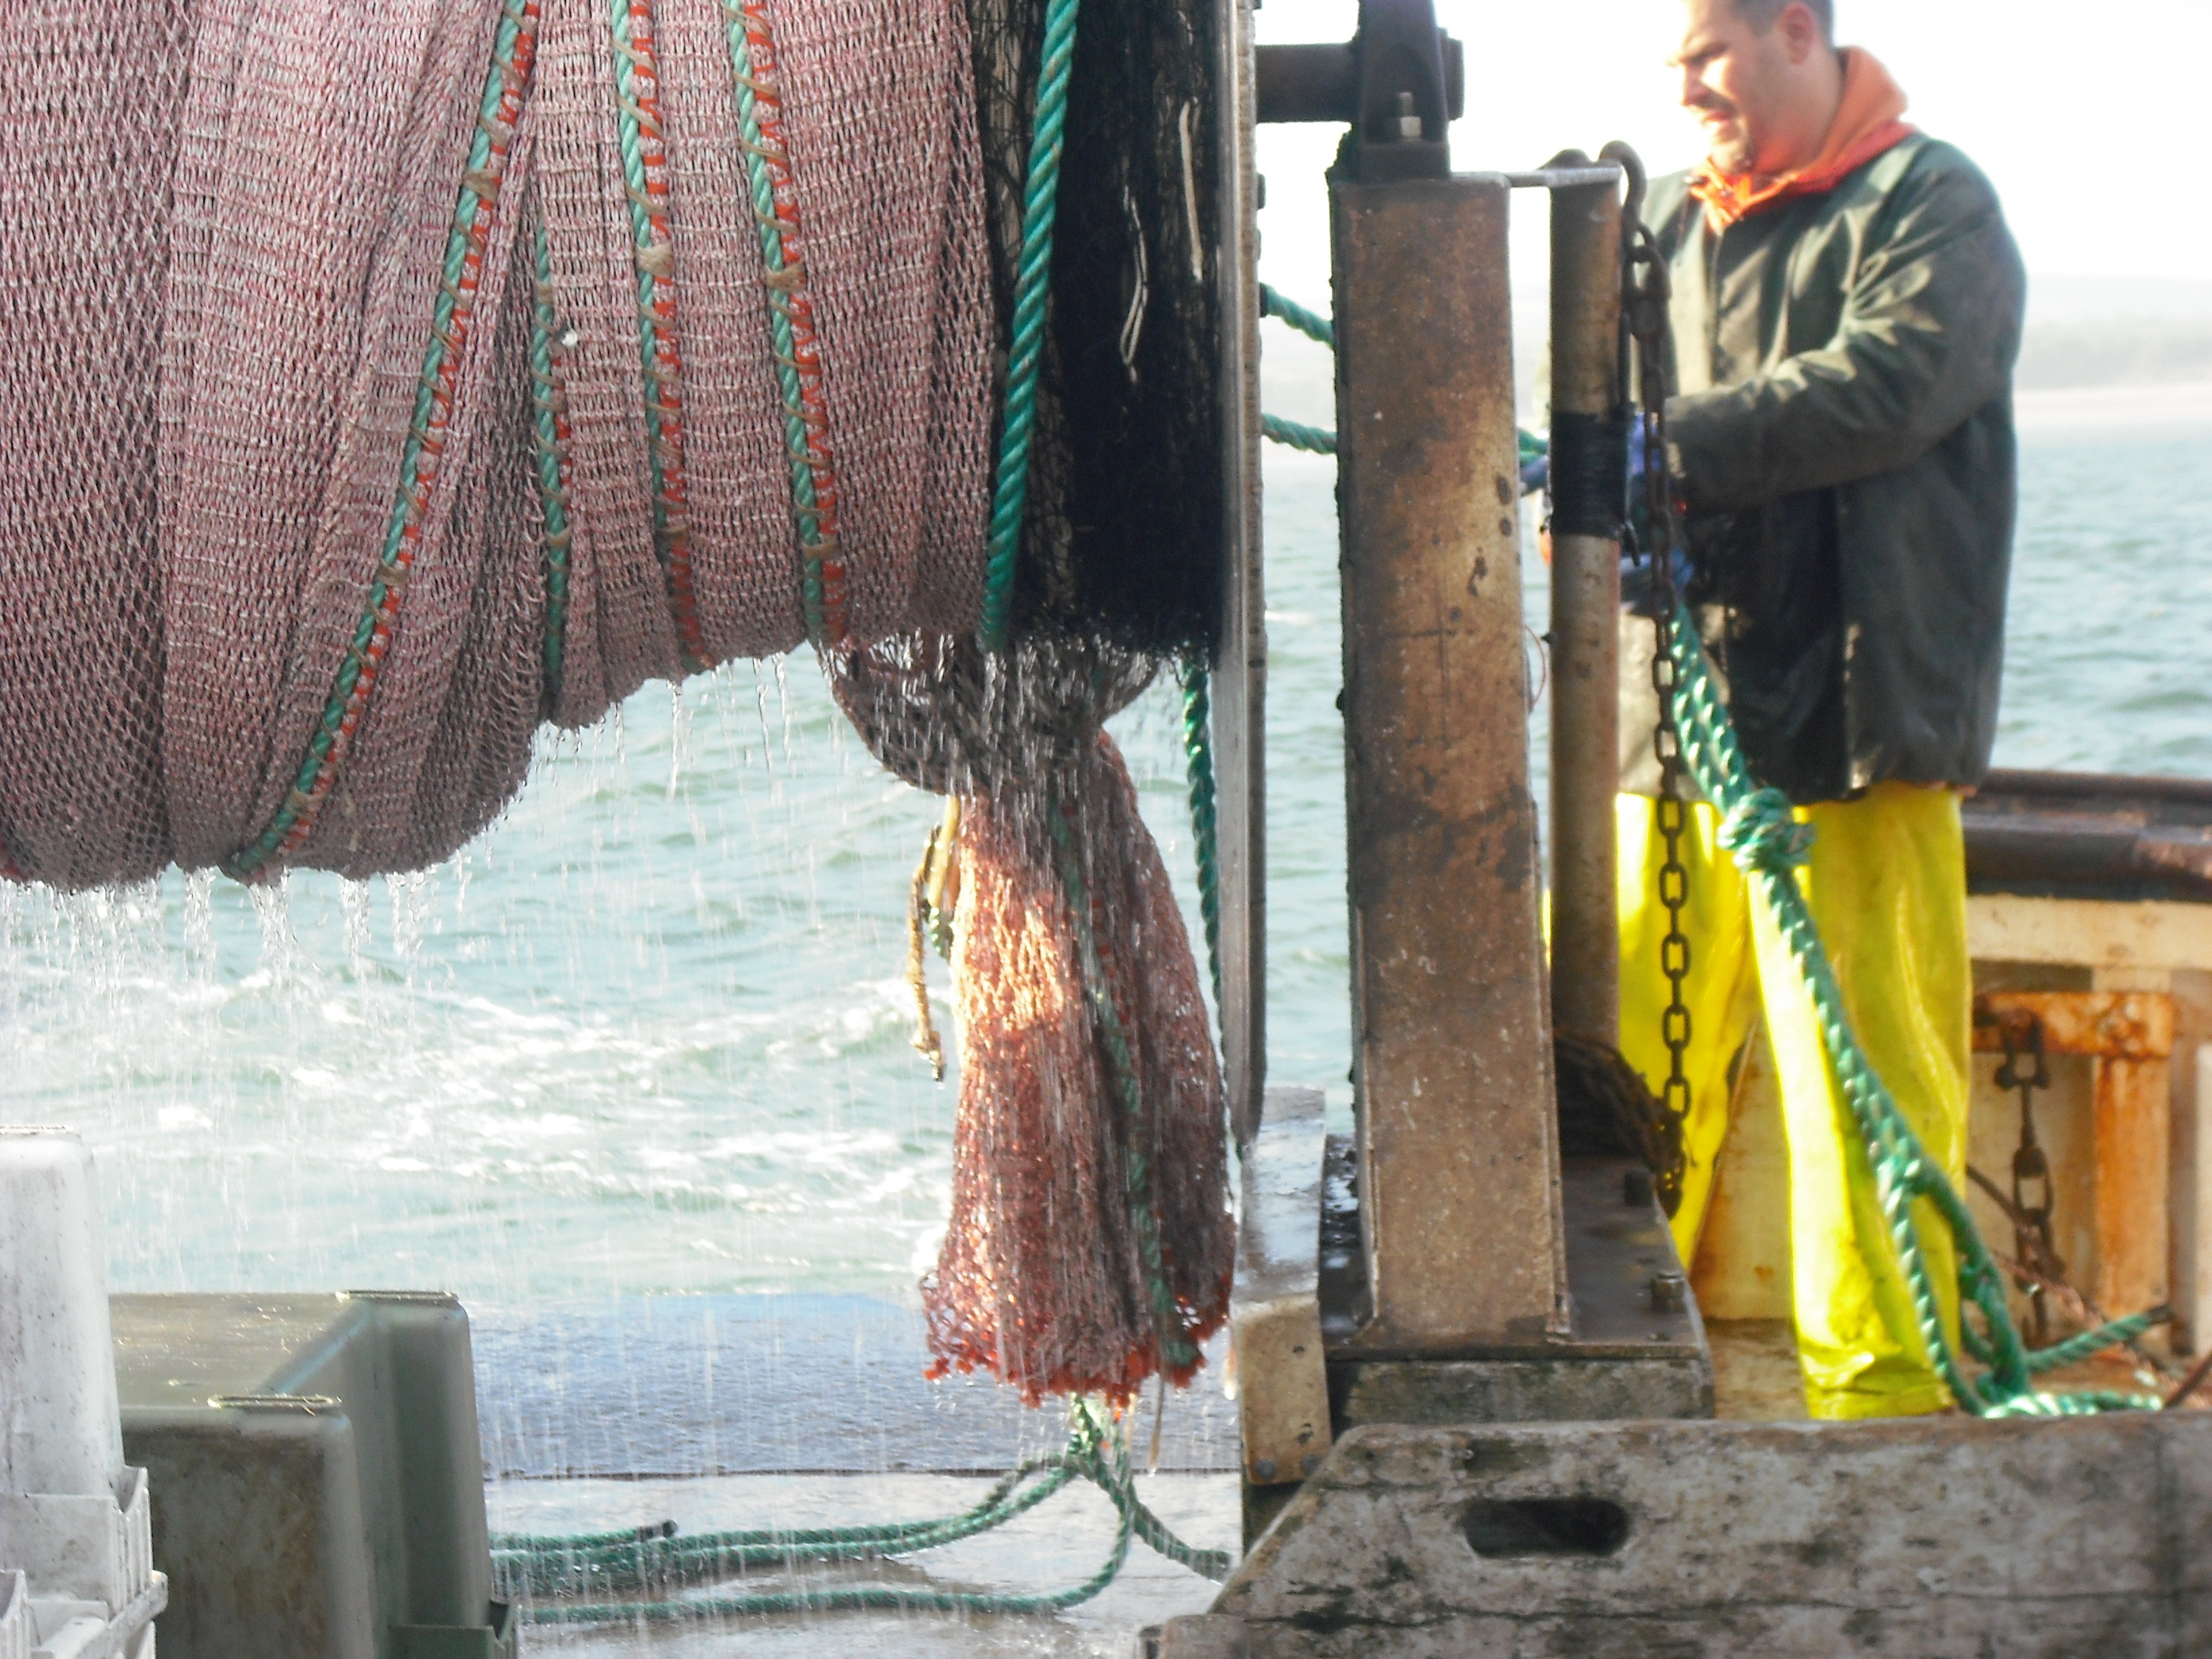 Stern of boat with trawl net on reel and fisherman